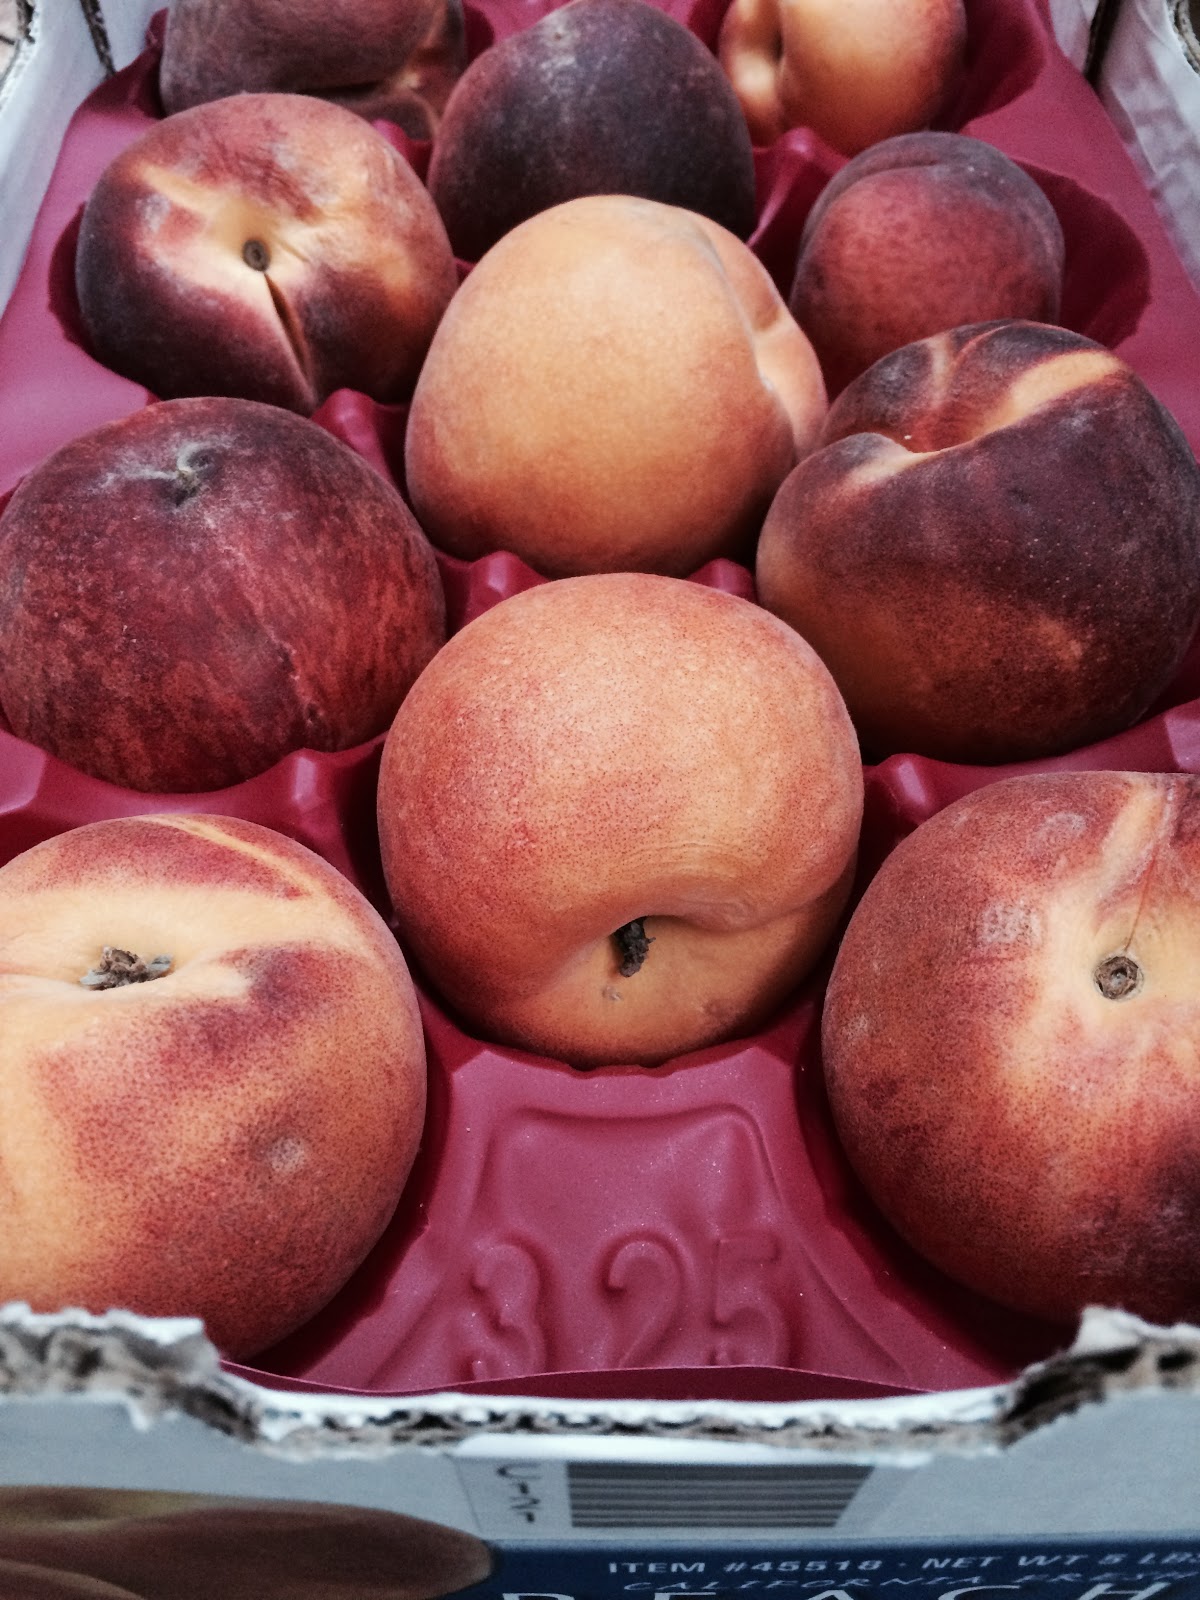 do-you-really-know-what-you-re-eating-california-peaches-costco-rebates-cooking-bargain